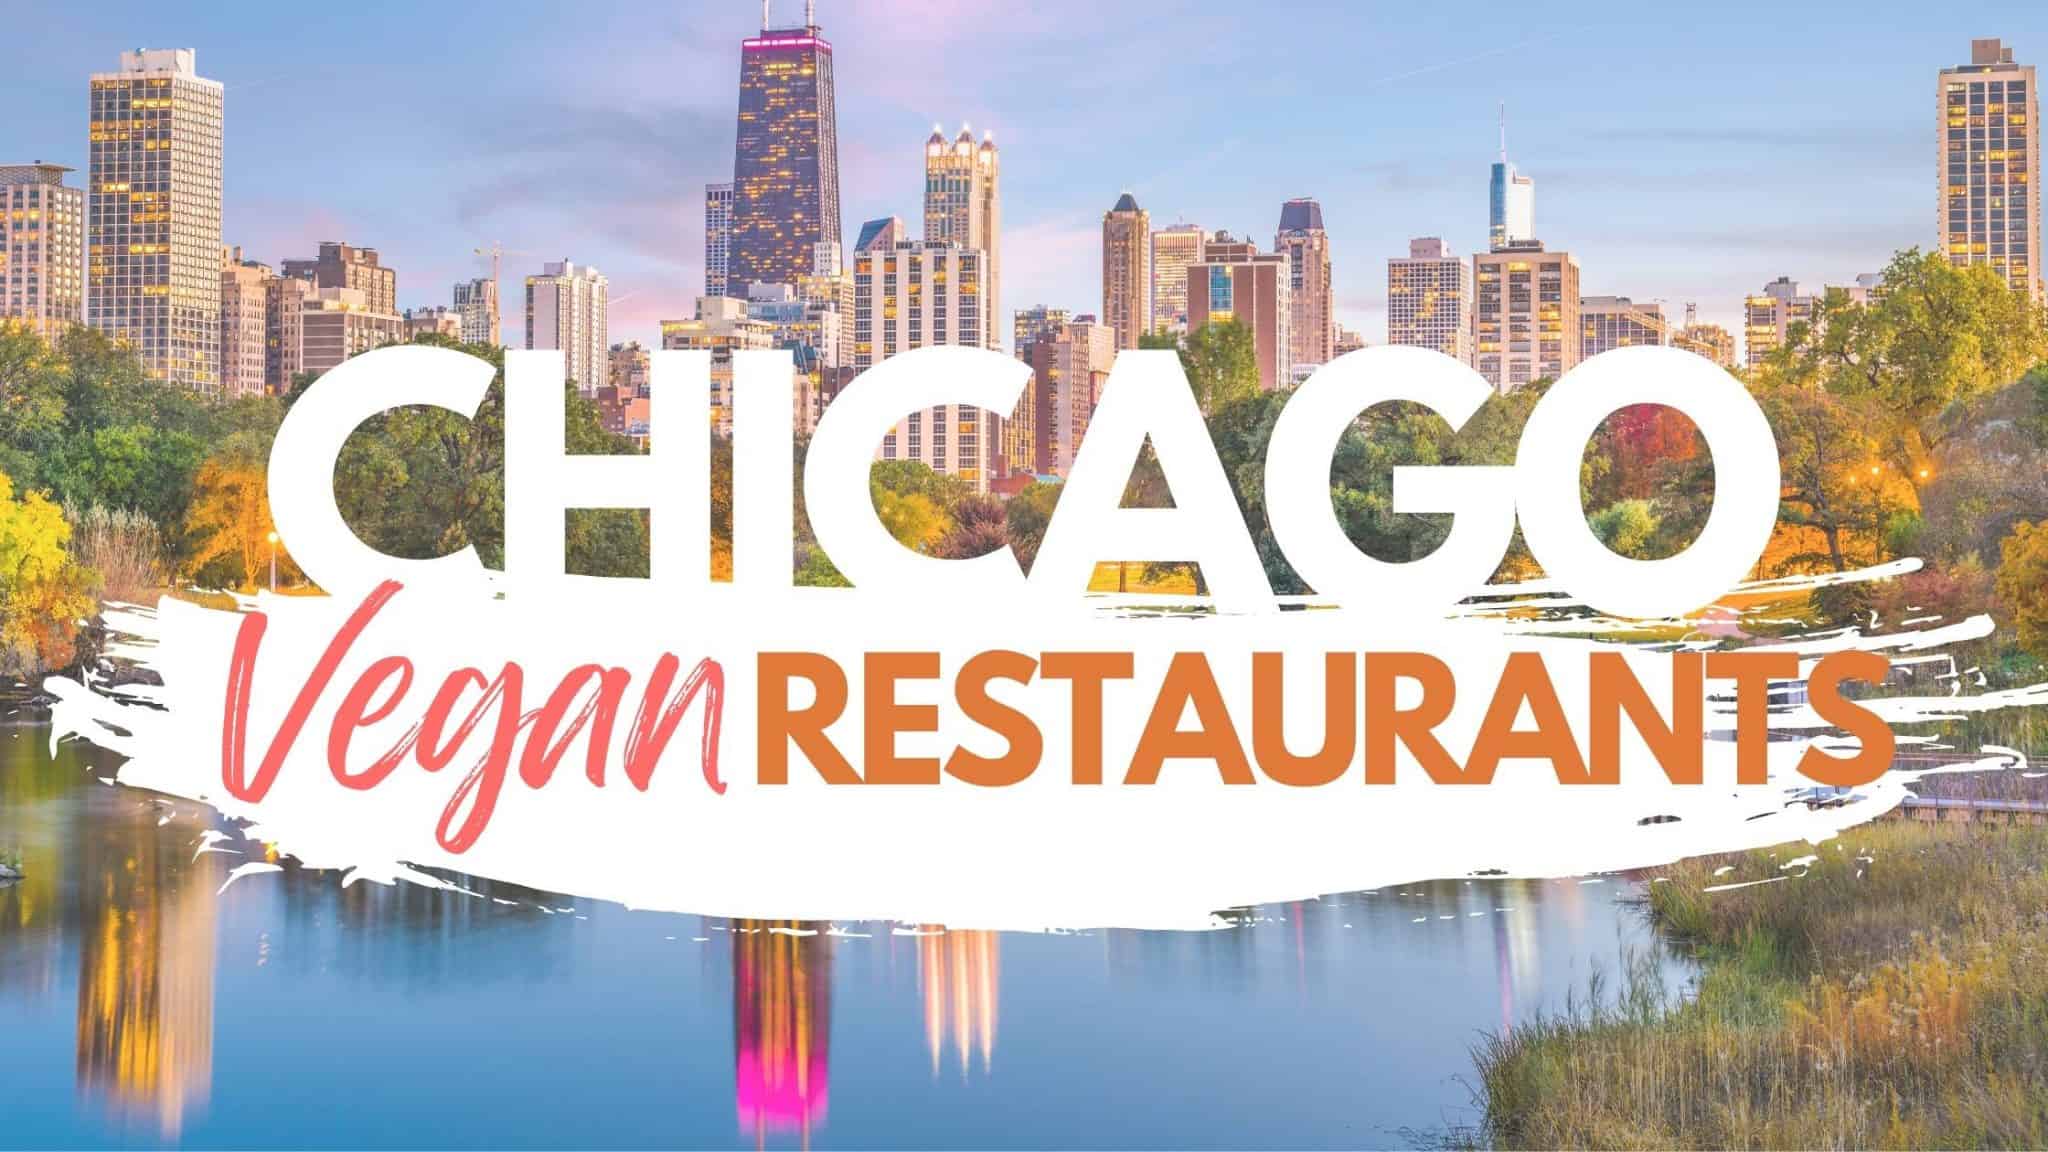 chicago vegan restaurants guide photo of the city with text on top